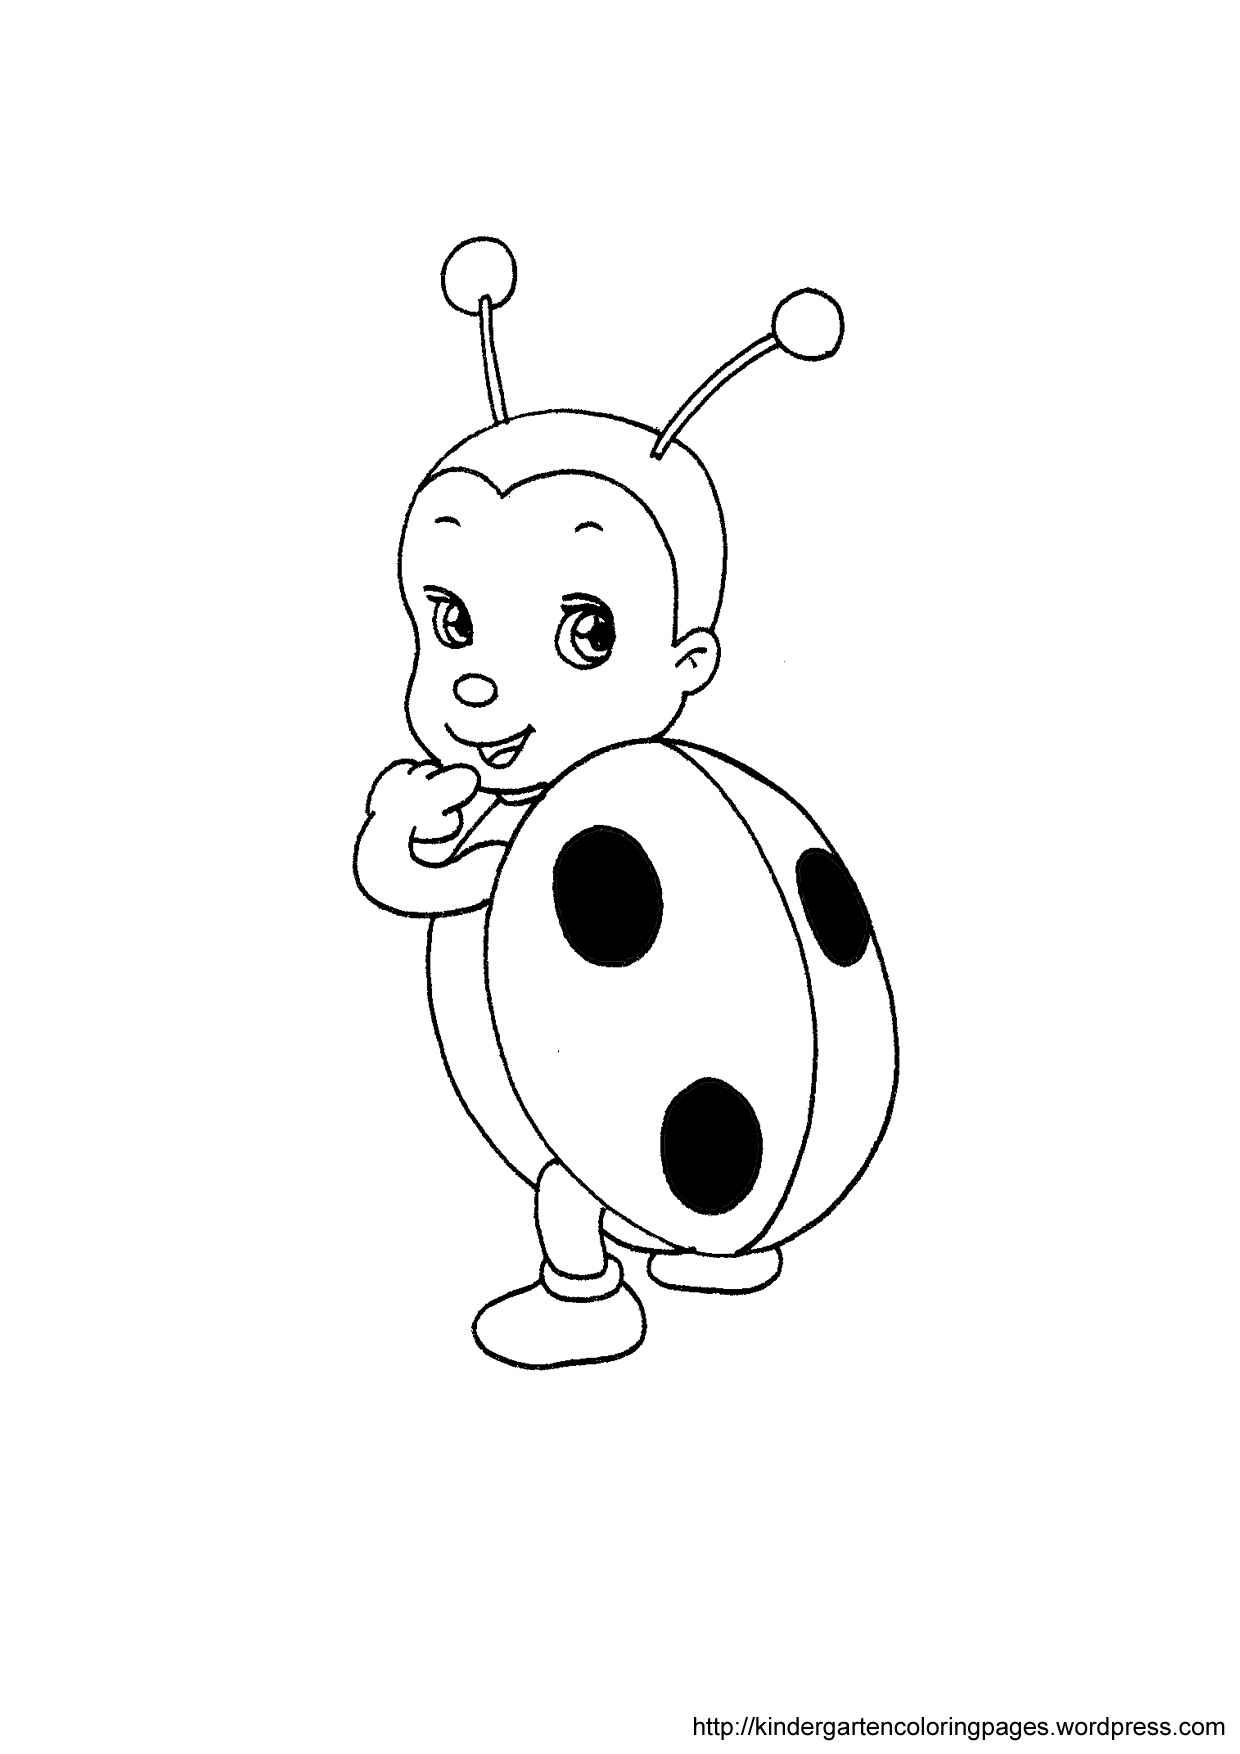 Ladybug Coloring Pages For Kids
 ladybug coloring pages for preschoolers